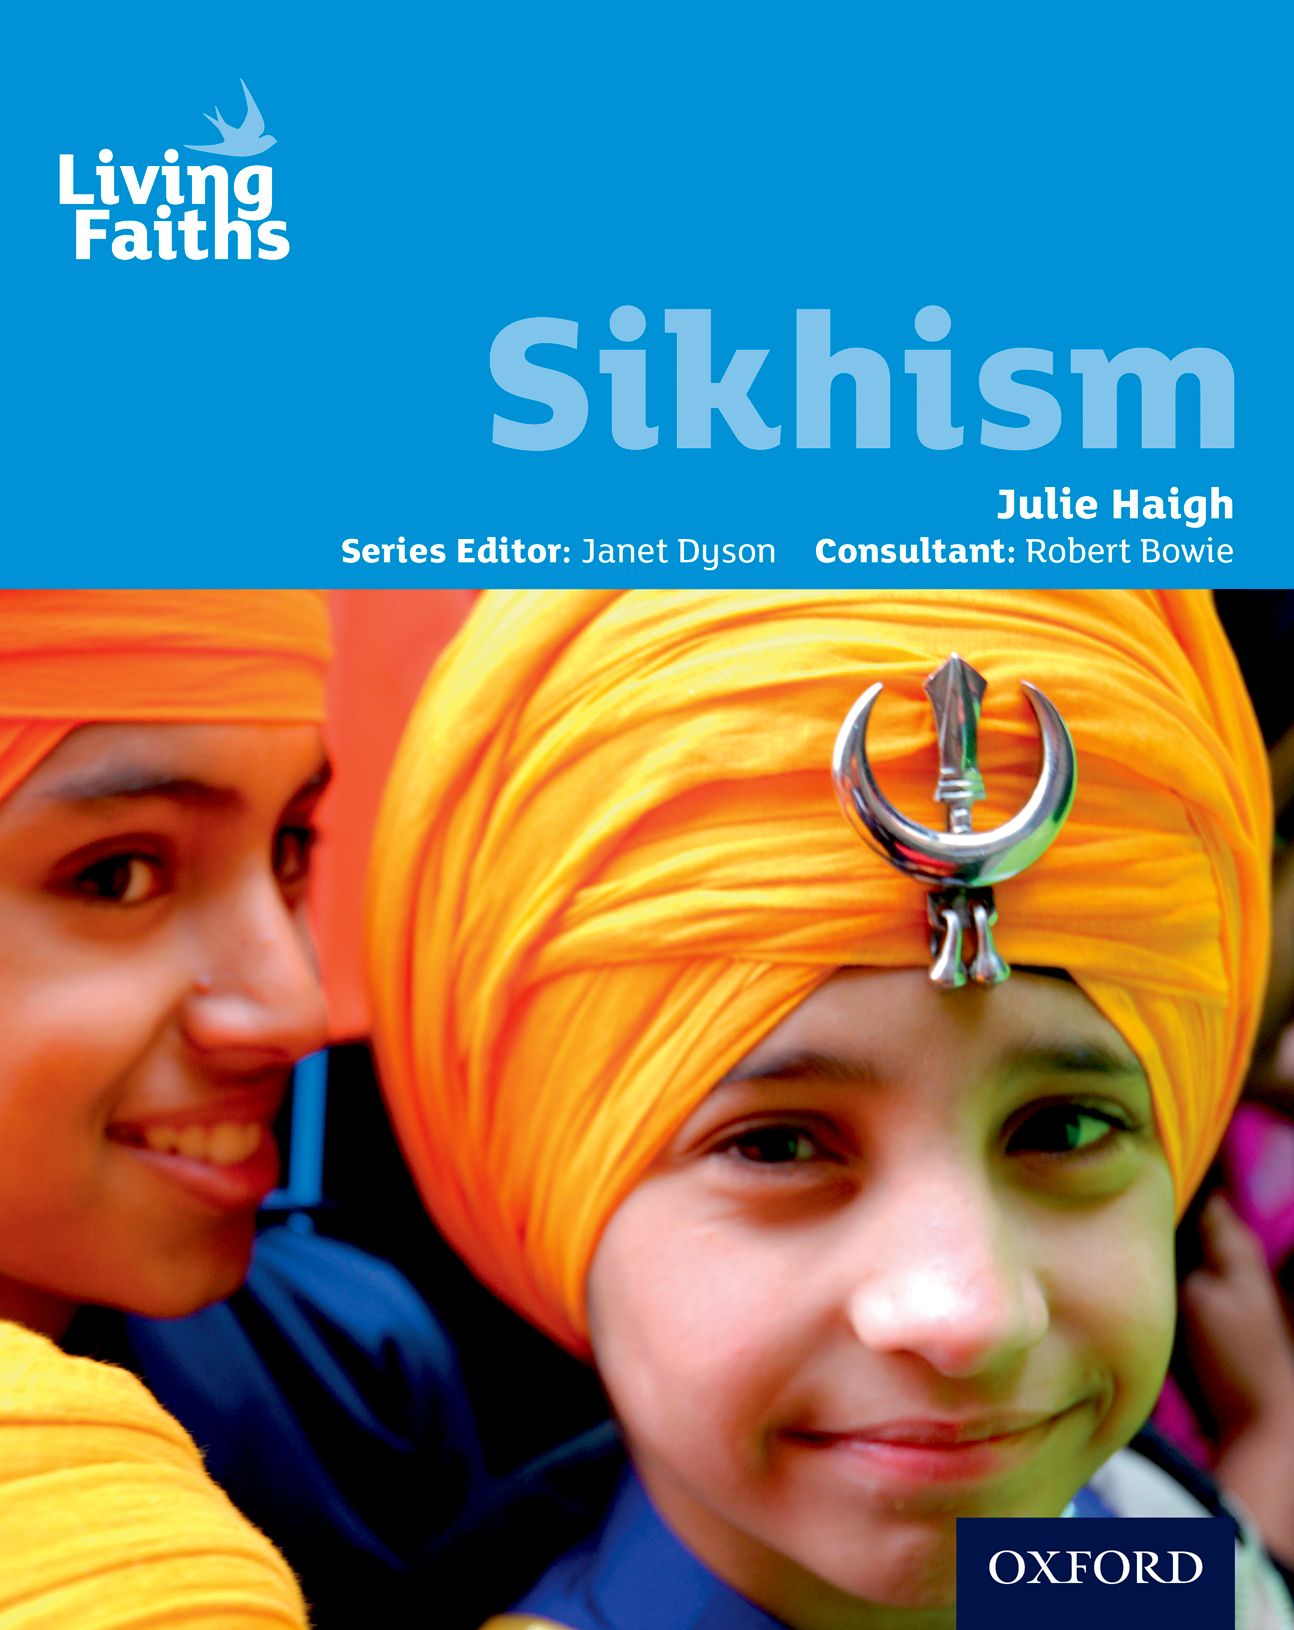 Featured image for “Living Faiths Sikhism Student Book”